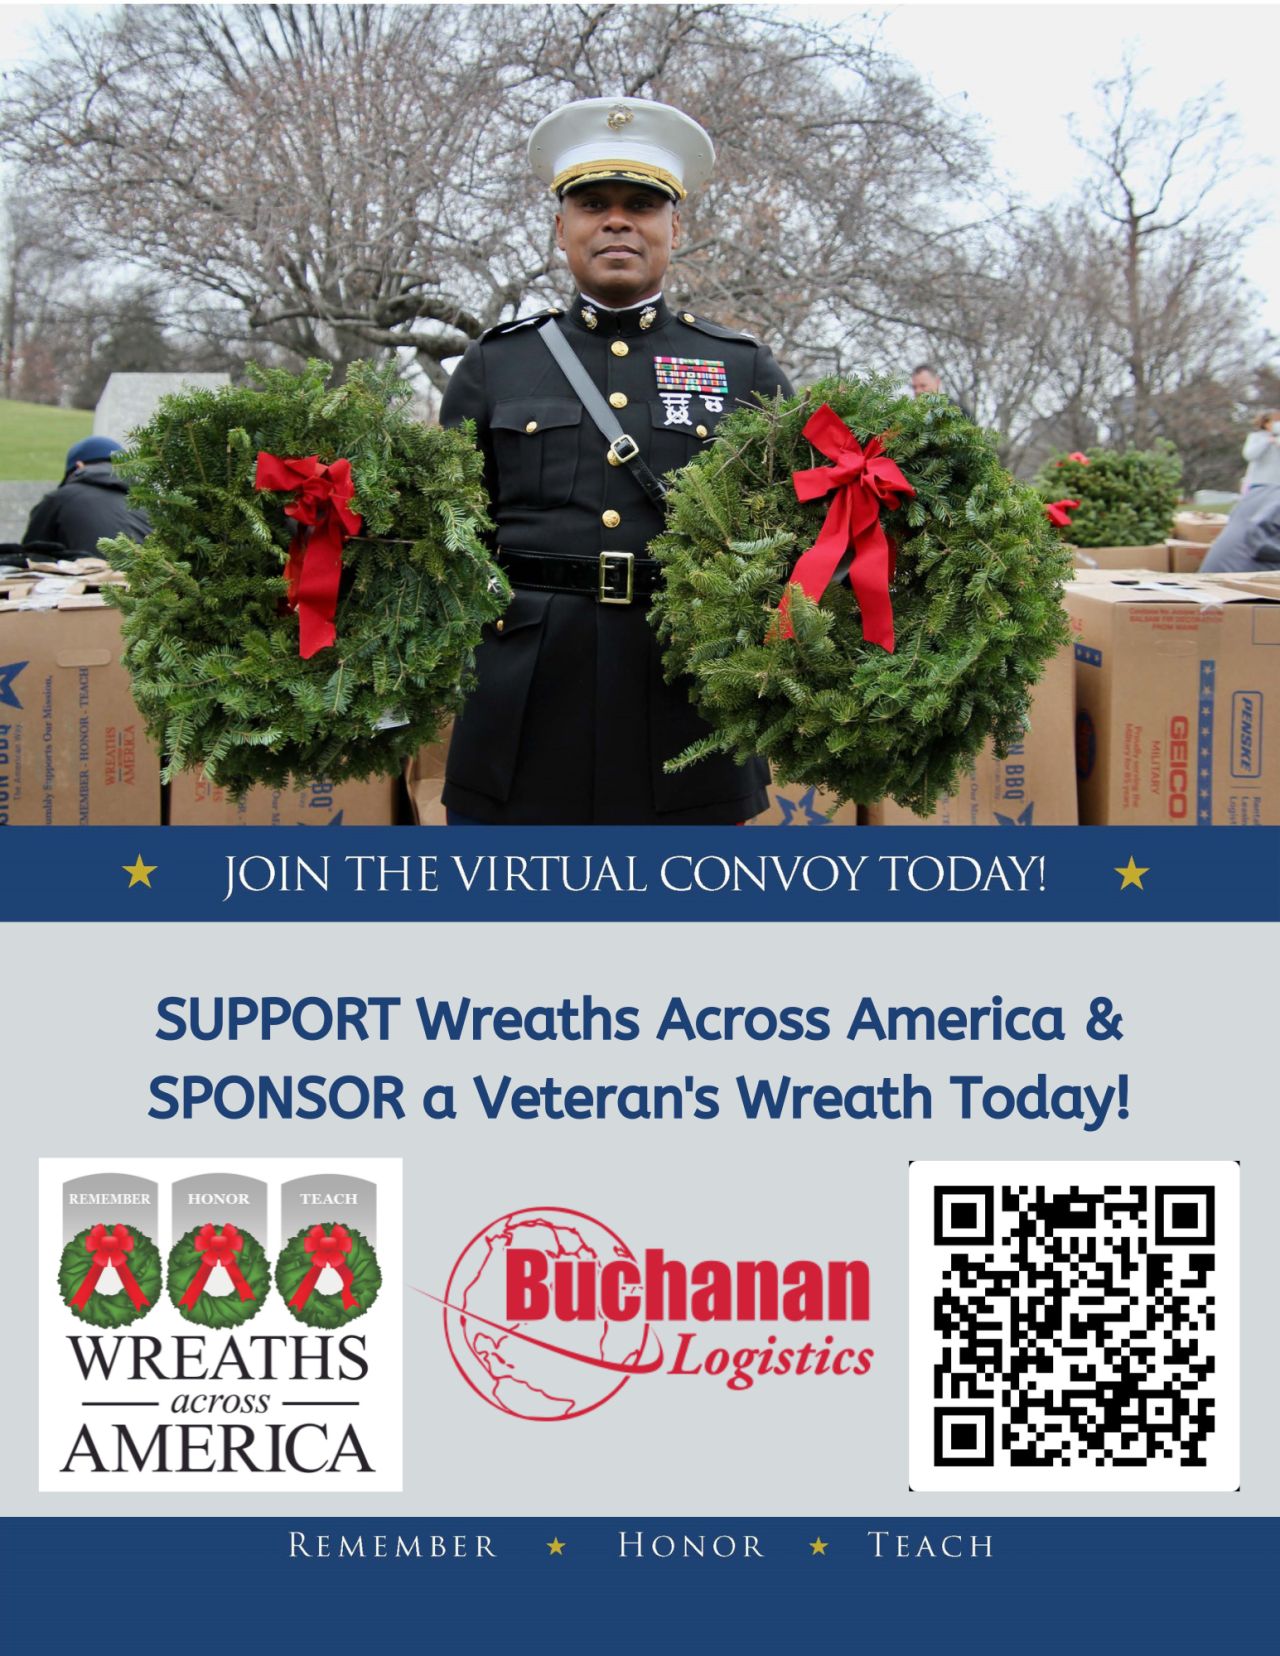 The Buchanan Company supports Wreaths Across America with a company match